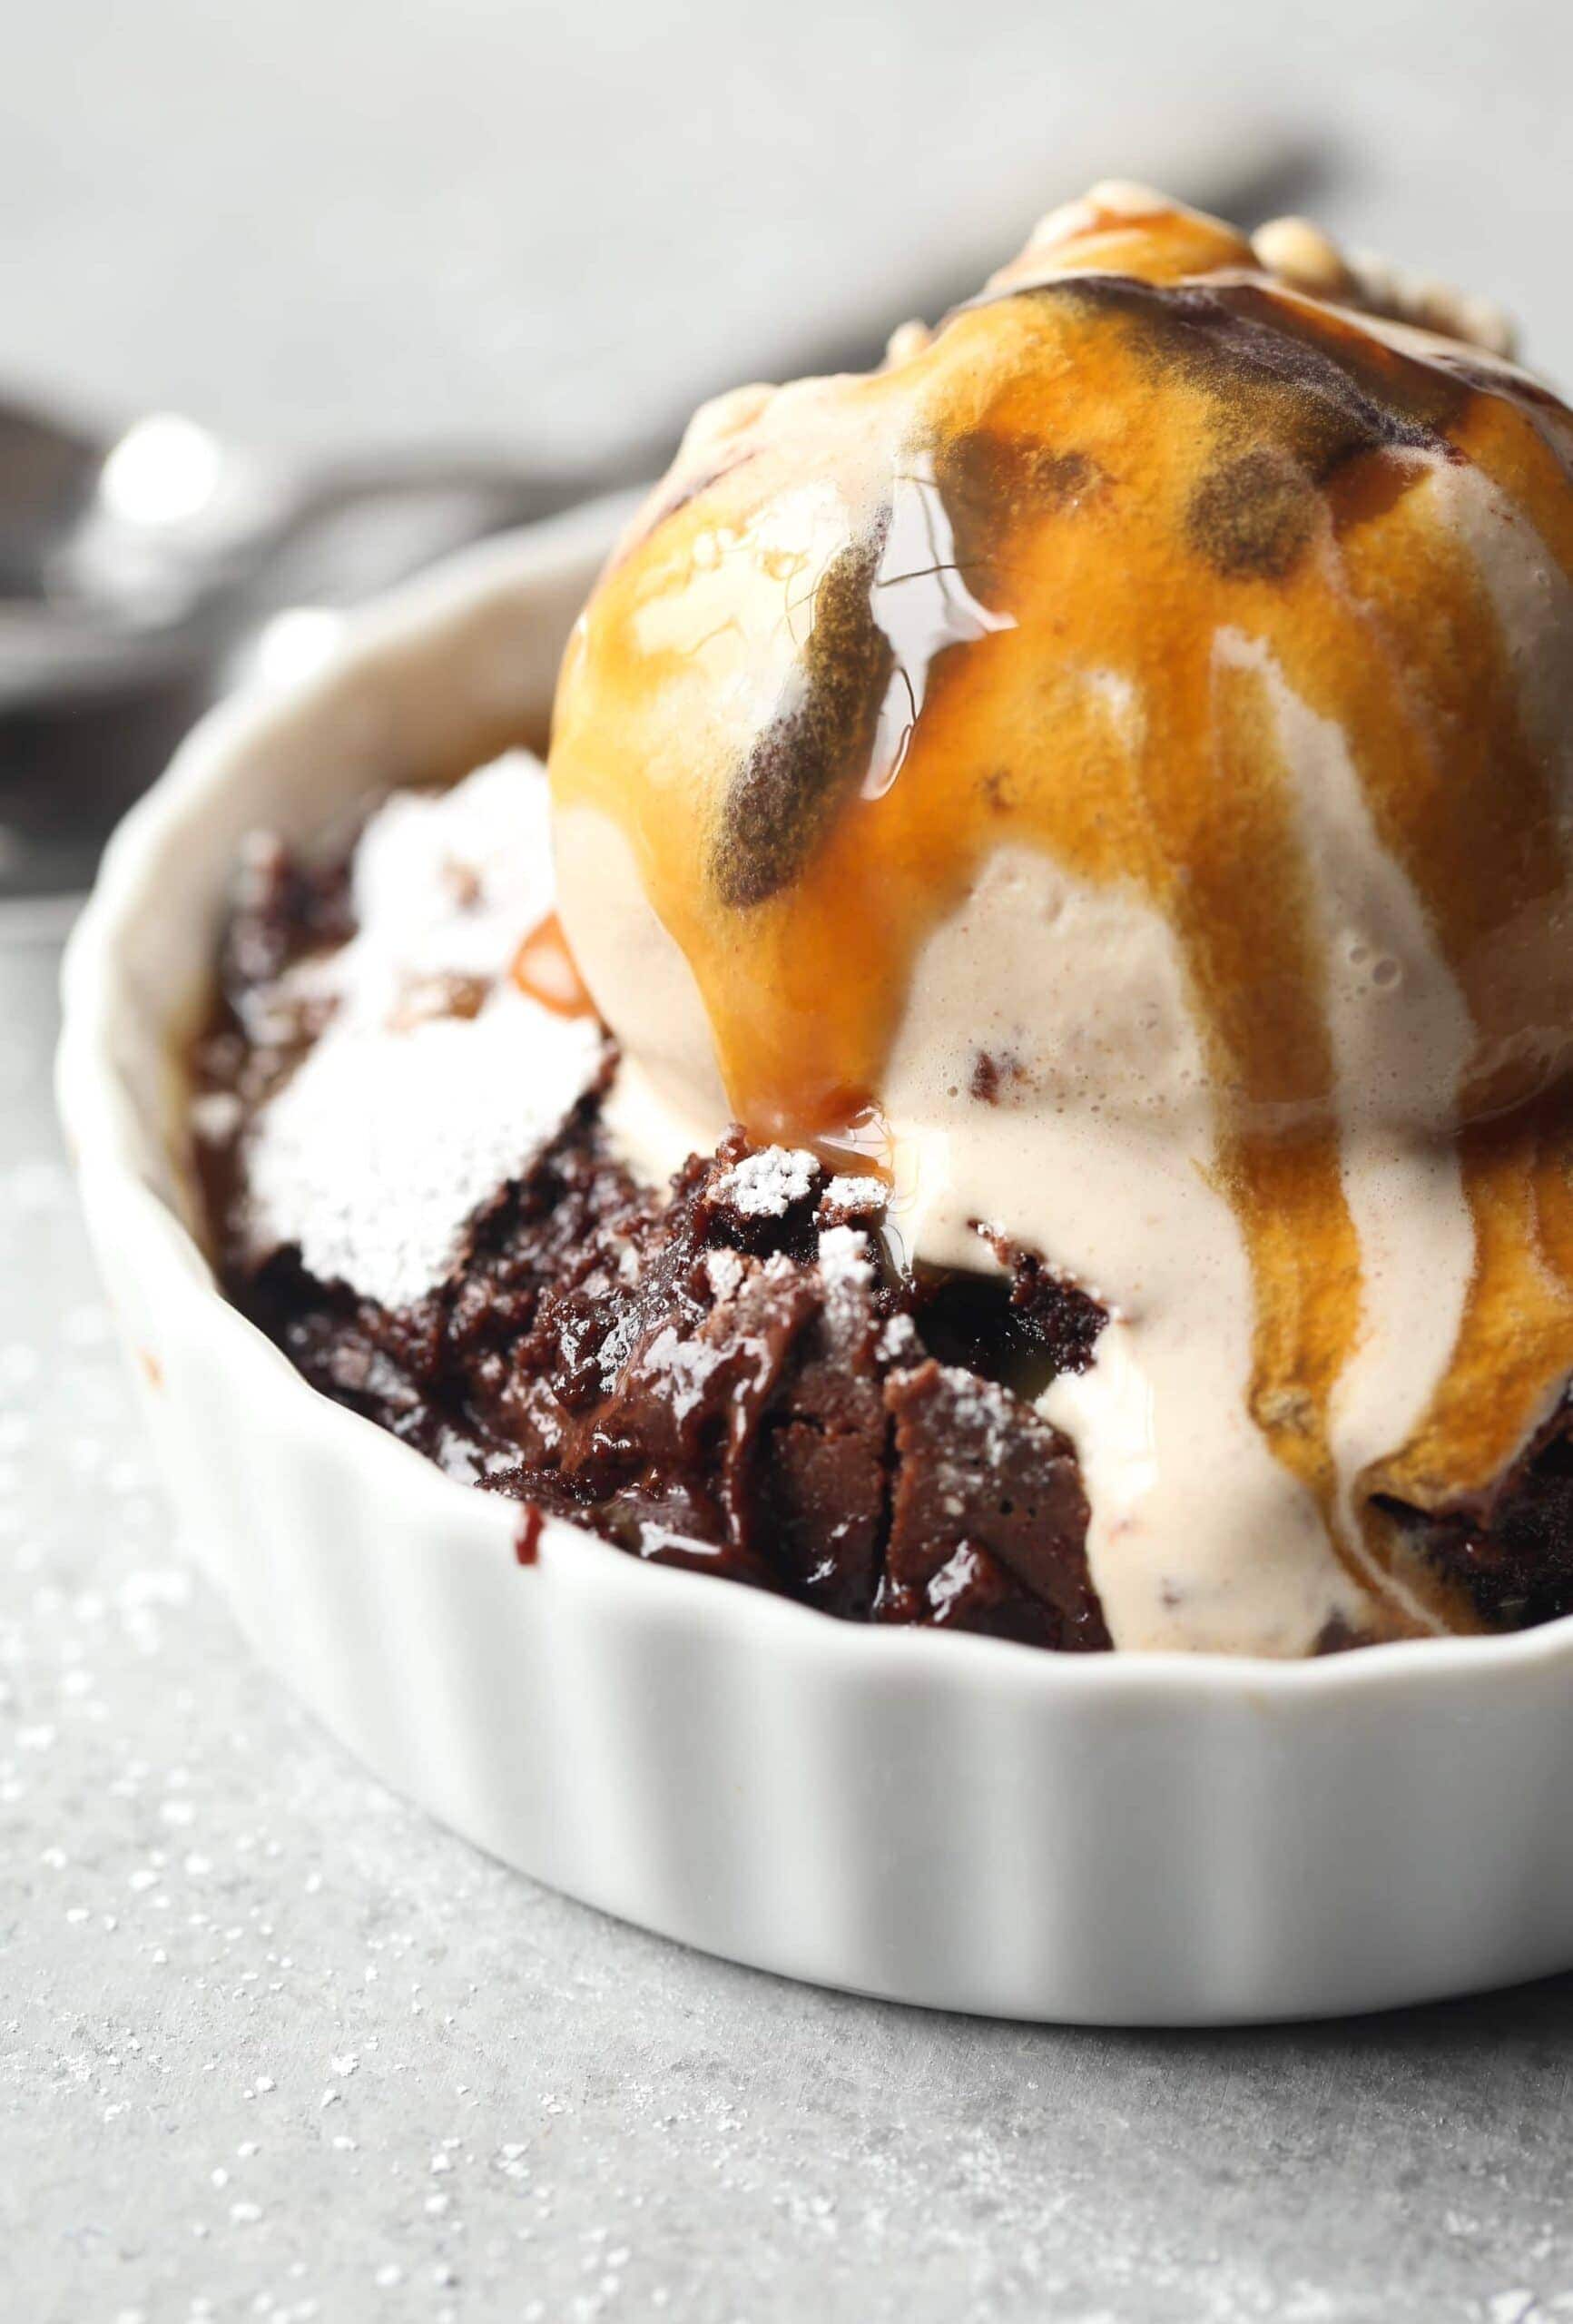 Brownie Pudding! A gooey, warm delicious brownie that you need to eat with a spoon!